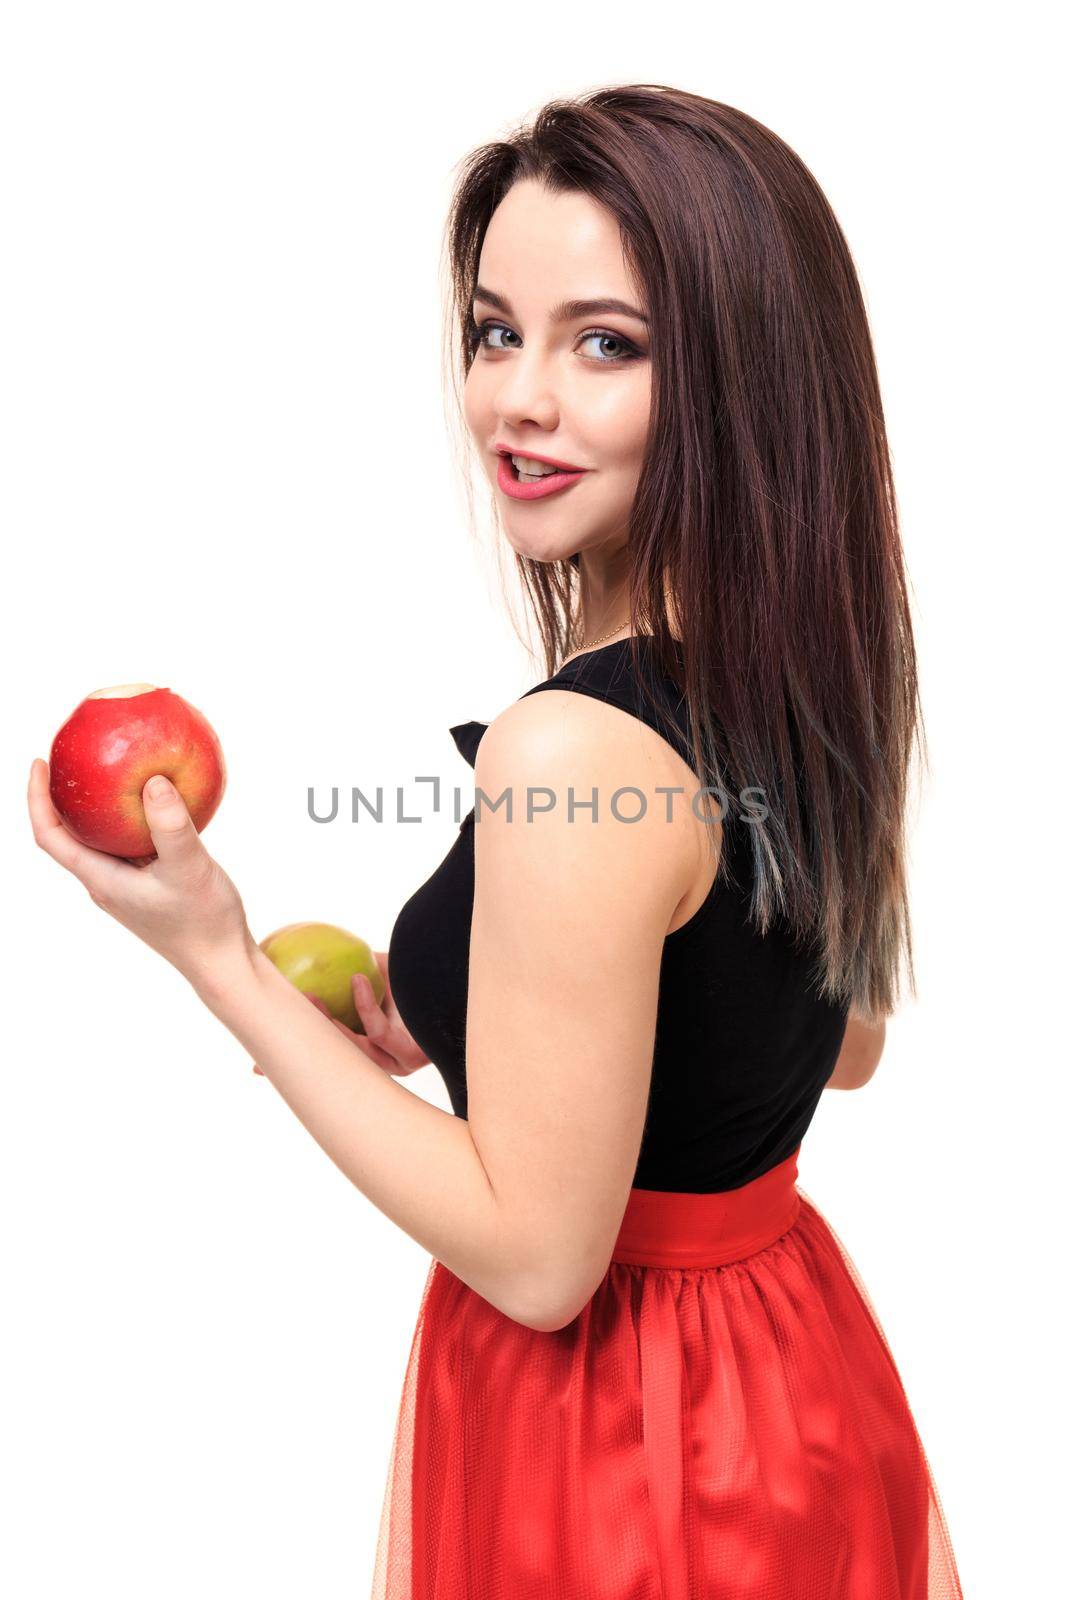 Beautiful young smiling woman holding an apple in her hands on a white background isolation. Bright brunette in black and red dress on a white background